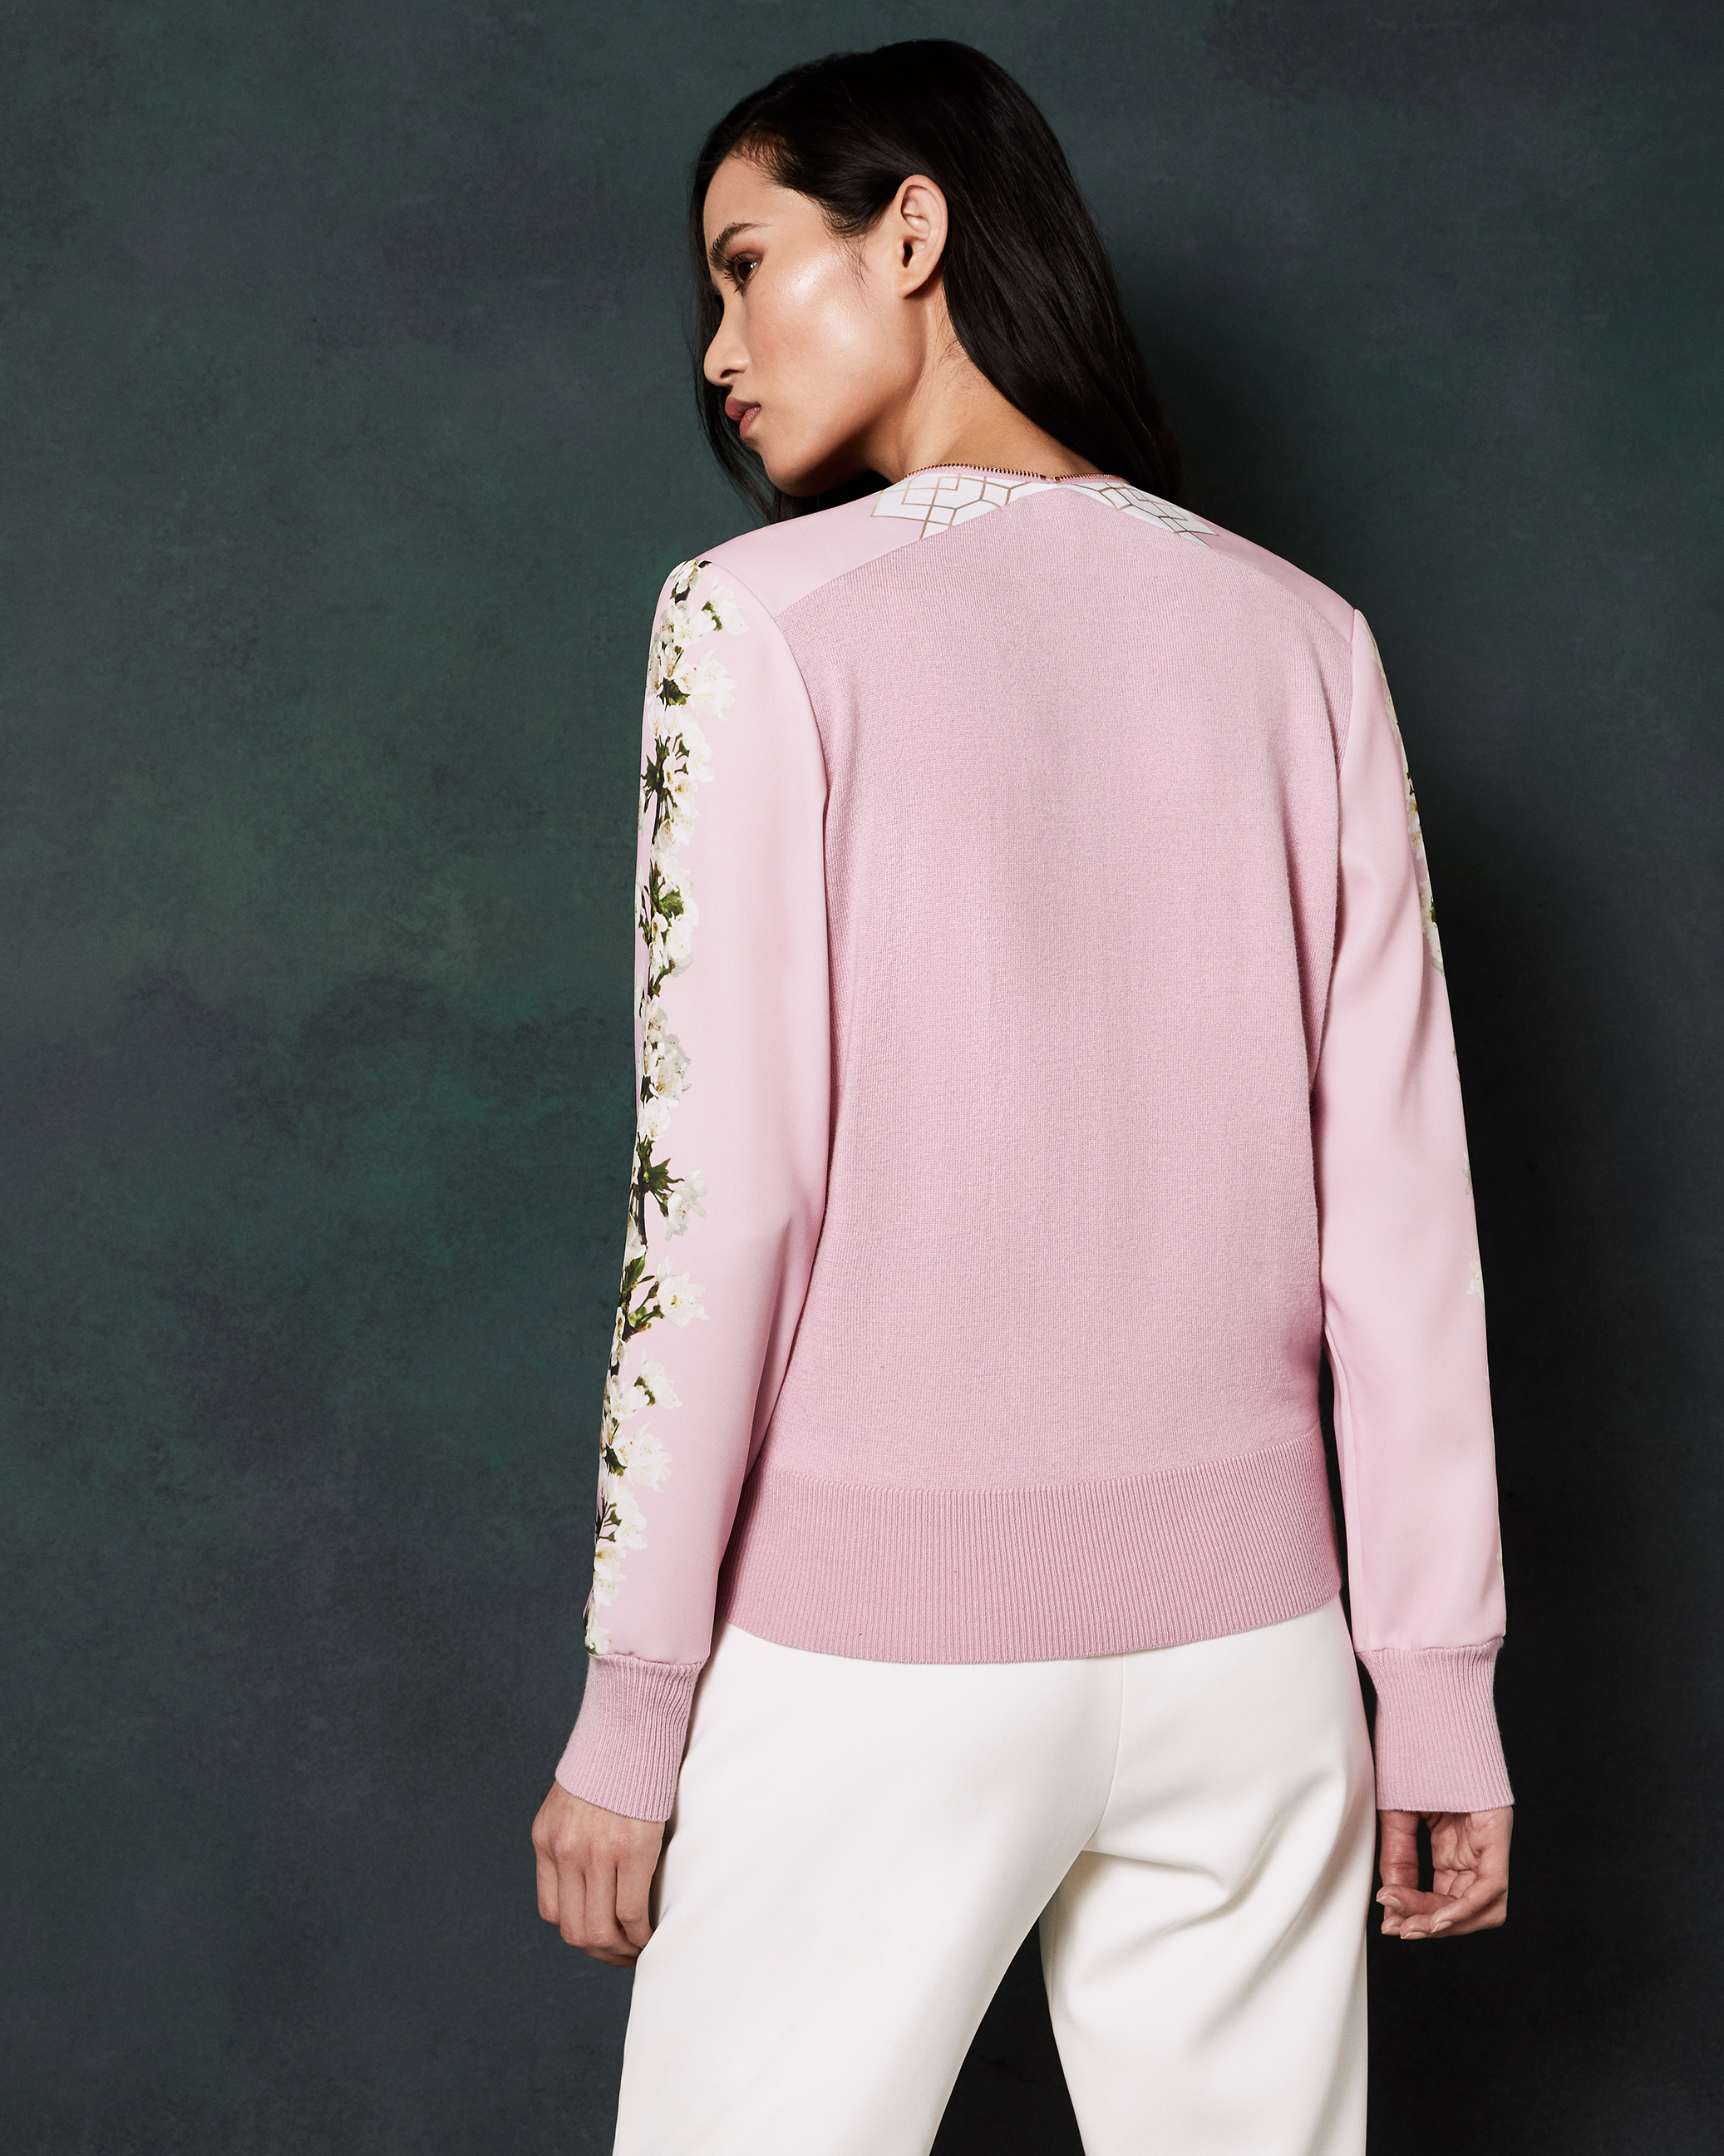 Ted Baker London Indiah Peony Pink Jumper Sweater No label 